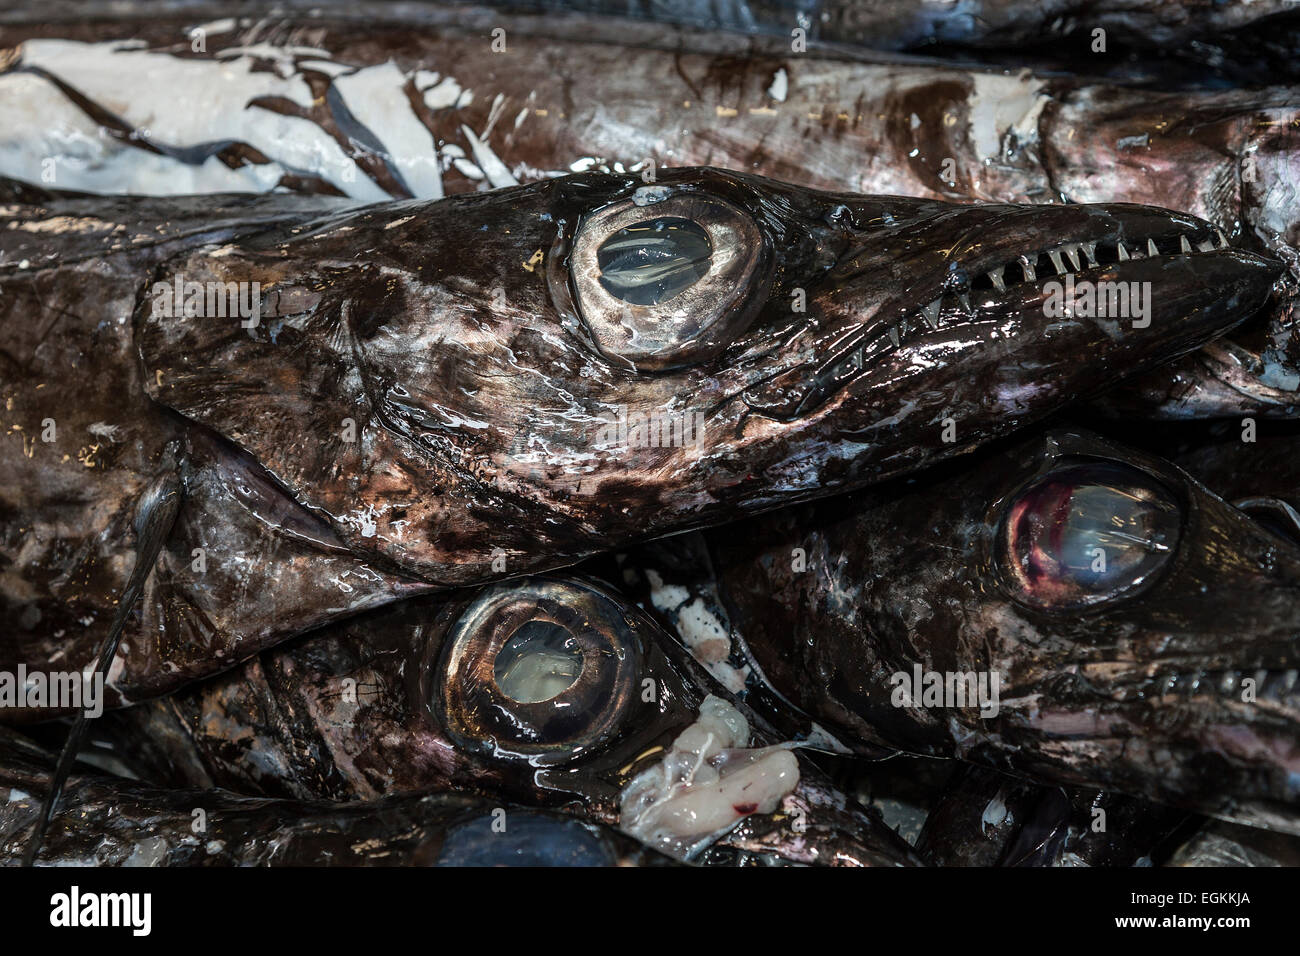 Black scabbard fish (Aphanopus carbo), Fish Market, Funchal, Madeira, Portugal Stock Photo